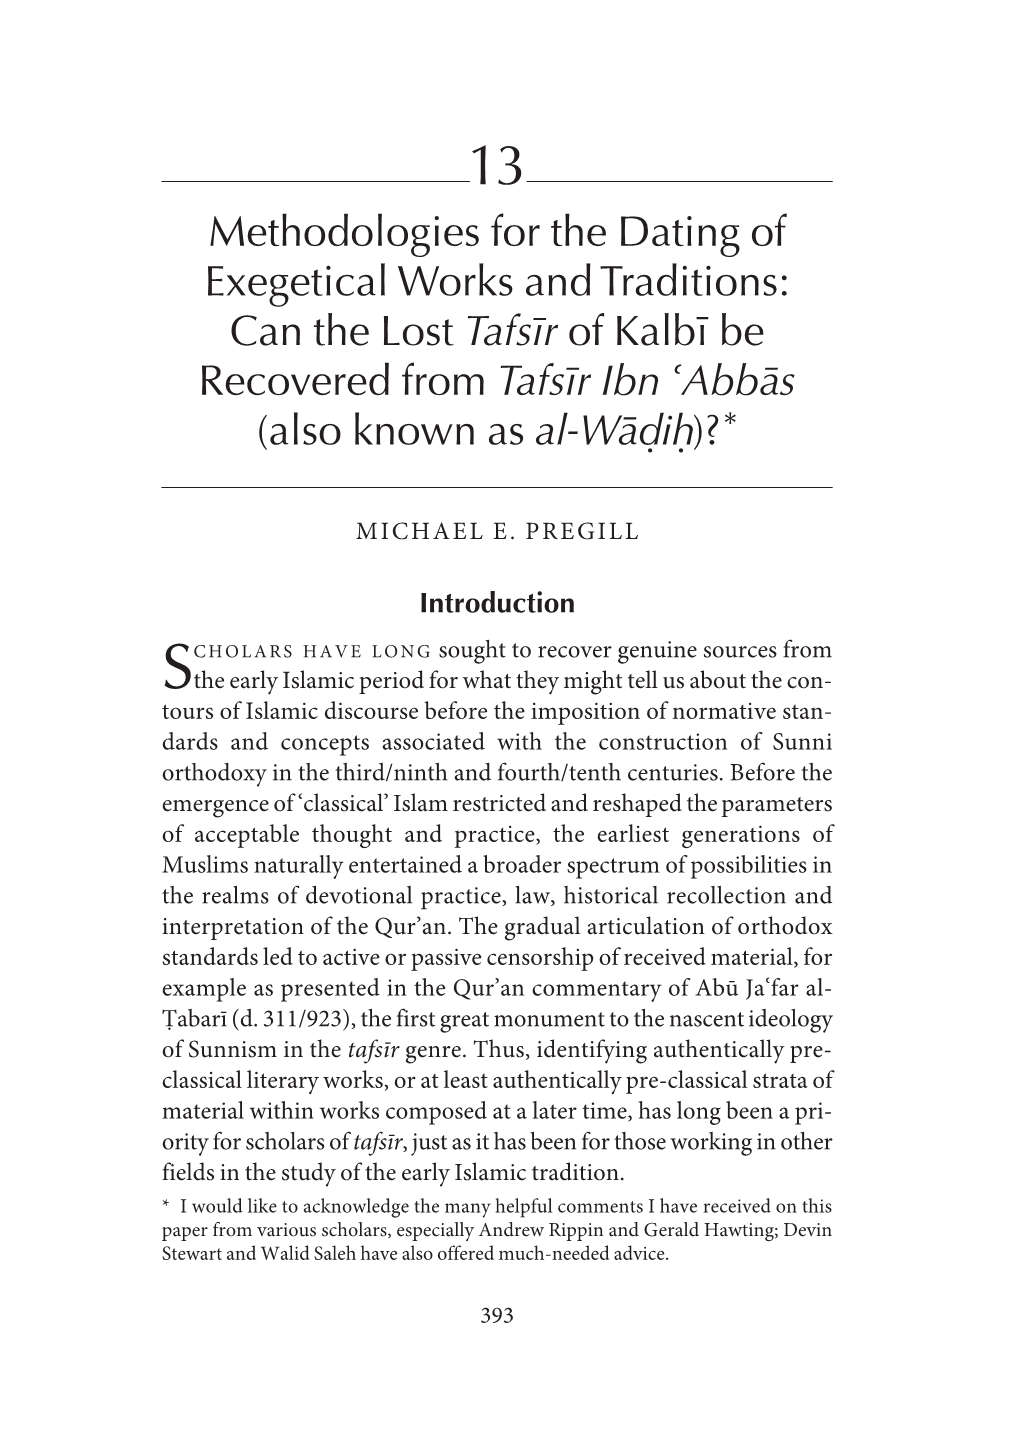 Methodologies for the Dating of Exegetical Works and Traditions: Can the Lost Tafsı¯R of Kalbı¯Be Recovered from Tafsı¯R Ibn Abba¯S (Also Known As Al-Wa¯D.Ih.)? *